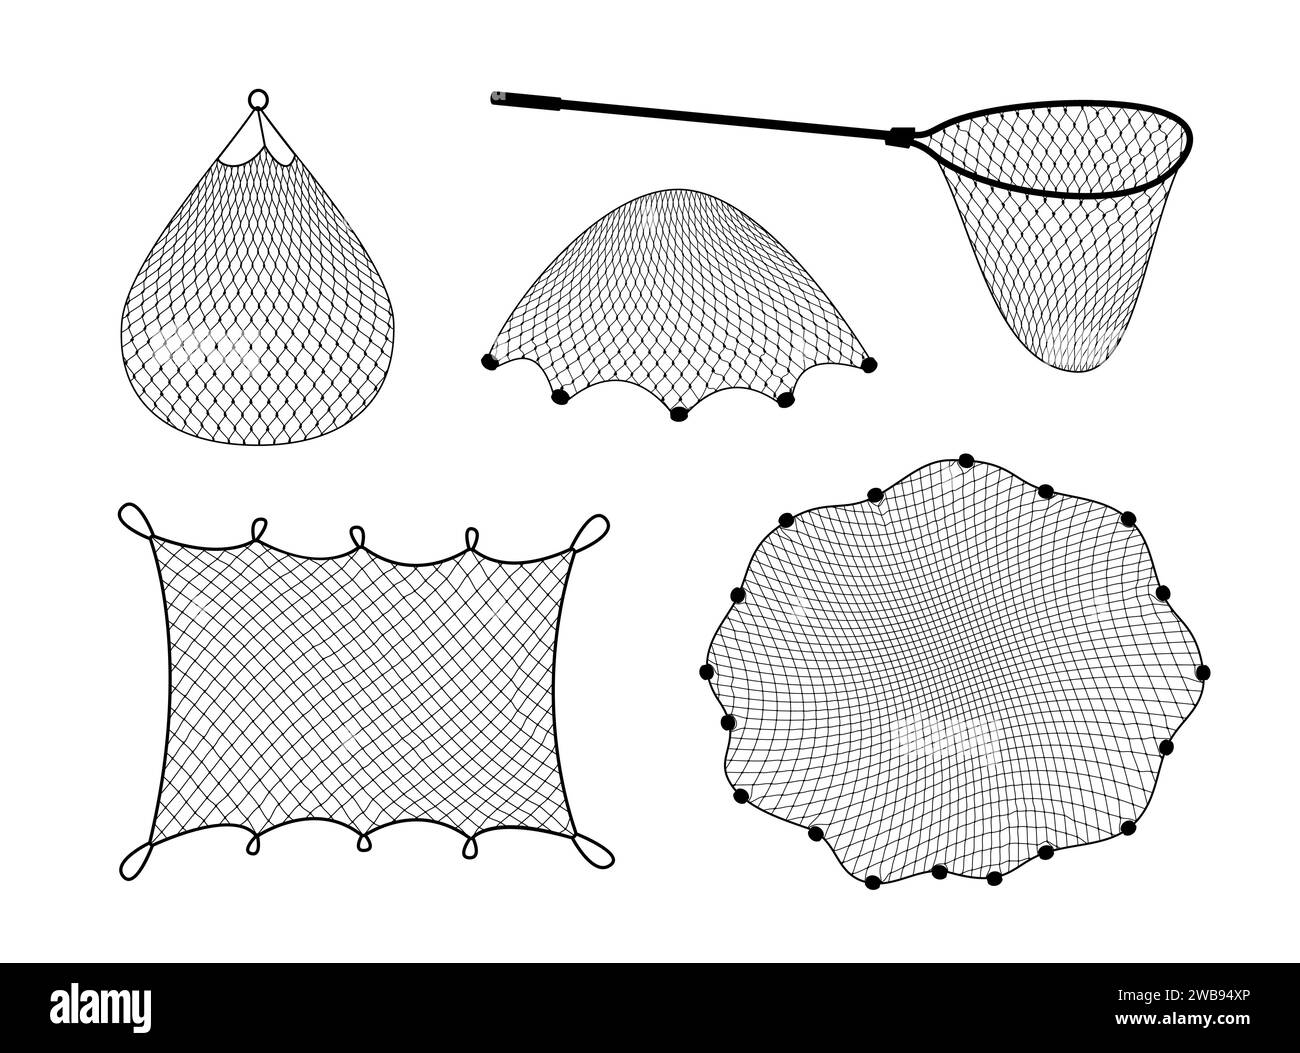 Fish net, isolated fishnet and fish scoop. Isolated 3d vector realistic  mesh tool used for catching, while a skip is handheld device for safely  transferring fish from one container to another or